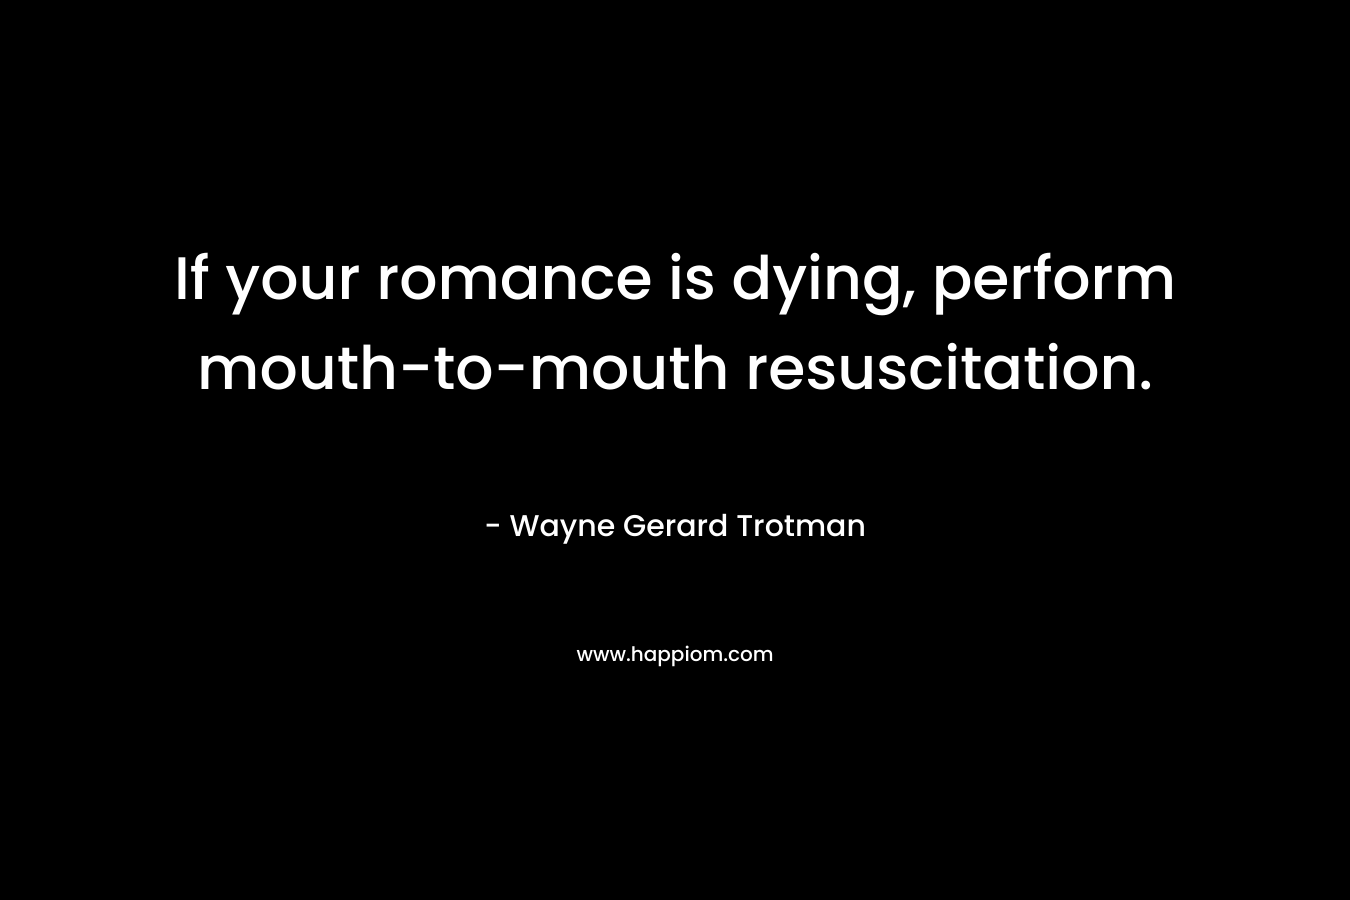 If your romance is dying, perform mouth-to-mouth resuscitation. – Wayne Gerard Trotman